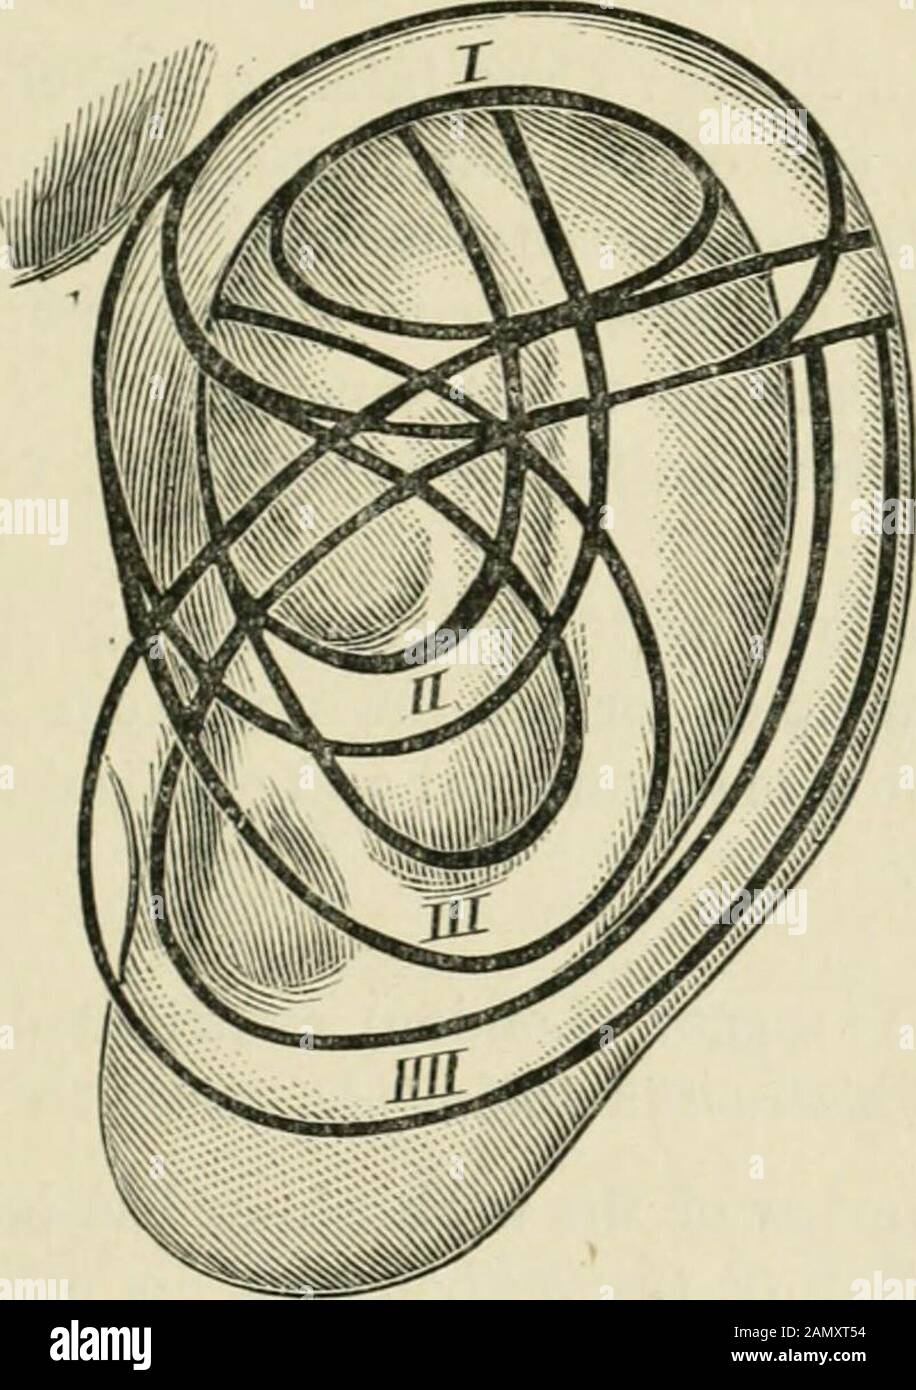 The Journal of laryngology and otology . anterior and inferior part of the auricle; to thesecondary, the posterior-superior part, with helix horizontalis anddescendens, cauda helicis, truncus of the anthelix and crus superiusanthelicis. The axis of the ear going from the incisura trago-helicina tothe tuberculum Darwinii, the real ear-point, gives the coefficient November, 1899.] Rhinology, and Otology. 609 for the powers of secondary folding of the auricle by traction andcompression, parallel or vertically, to the axis. Therefore, in thedeveloped external ear, we find the normal model, and exc Stock Photo